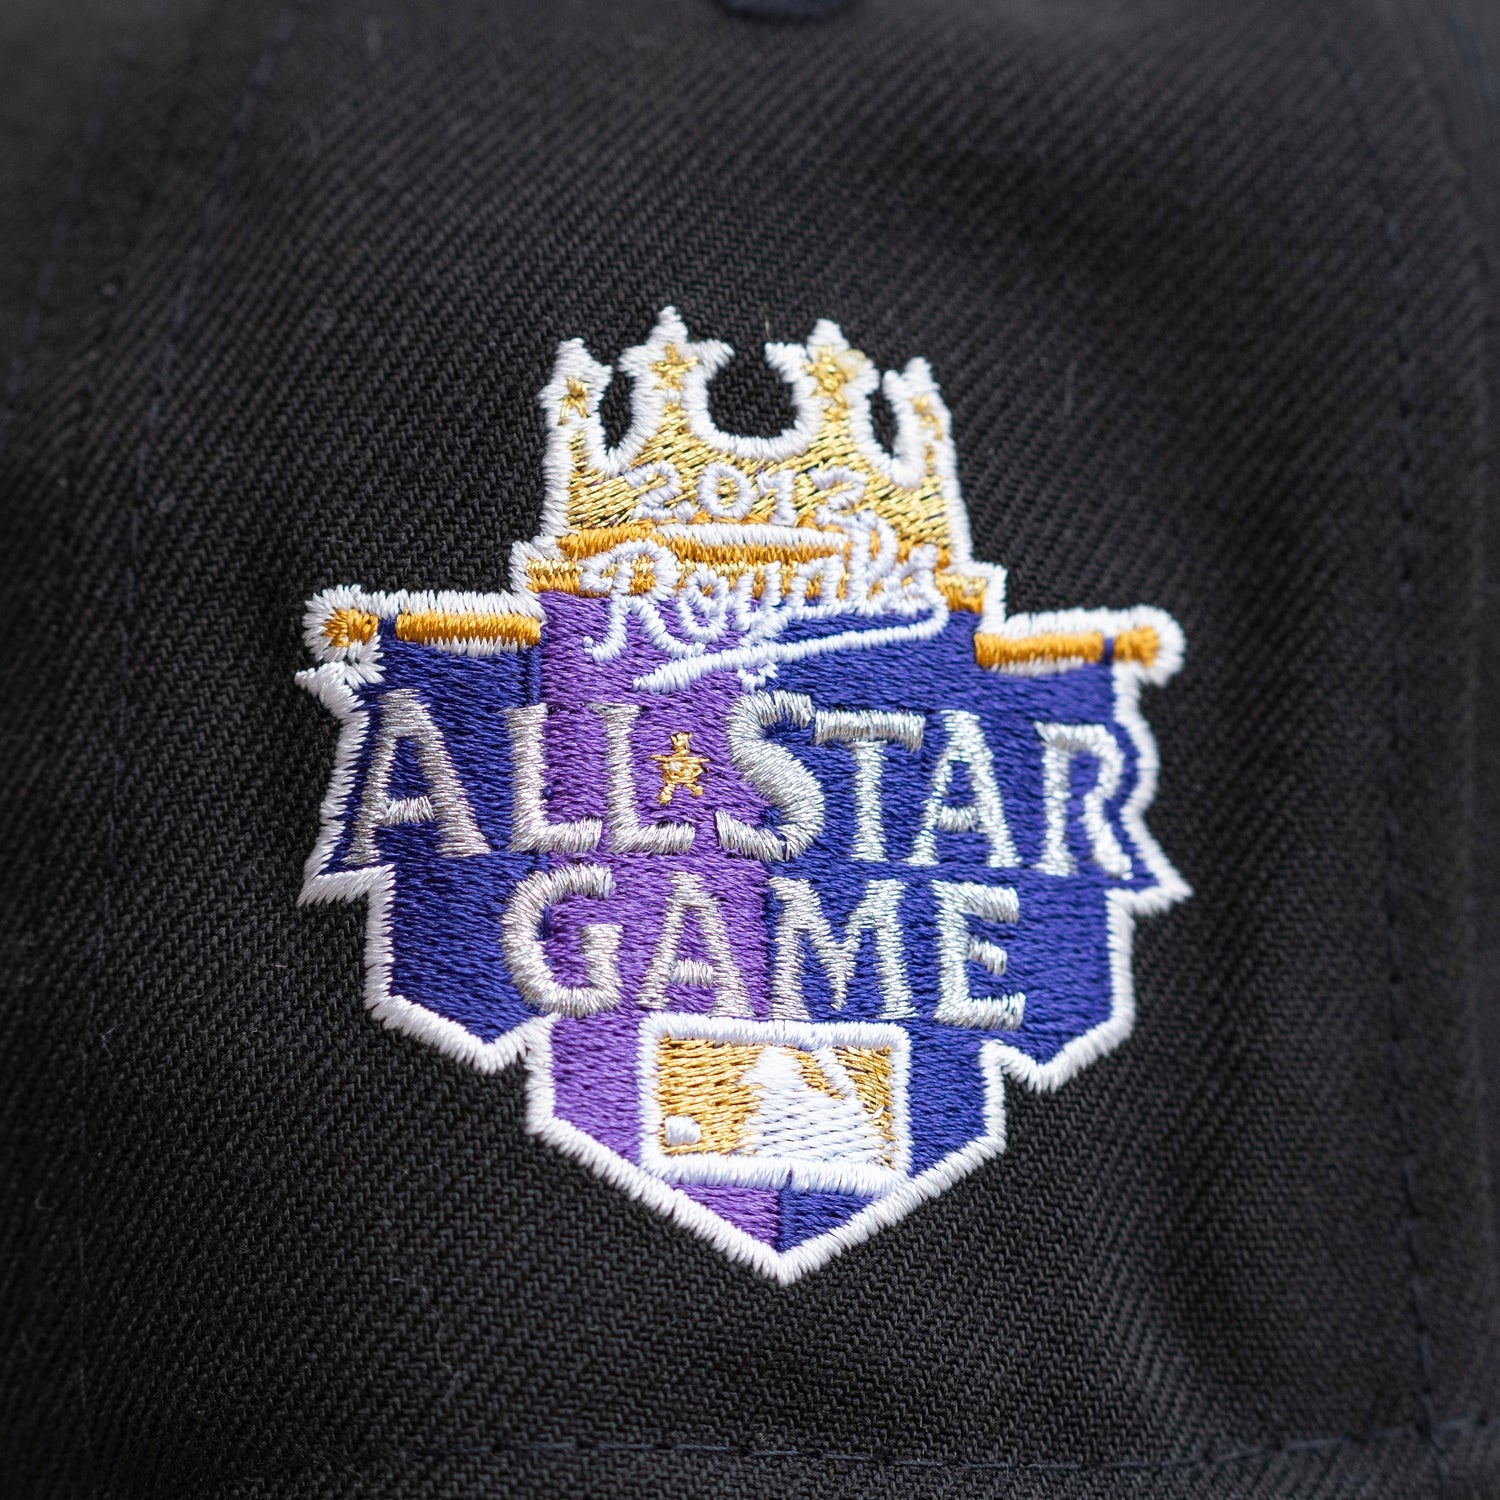 NEW ERA 59FIFTY MLB KANSAS CITY ROYALS ALL STAR GAME 2012 TWO TONE / KELLY GREEN UV FITTED CAP